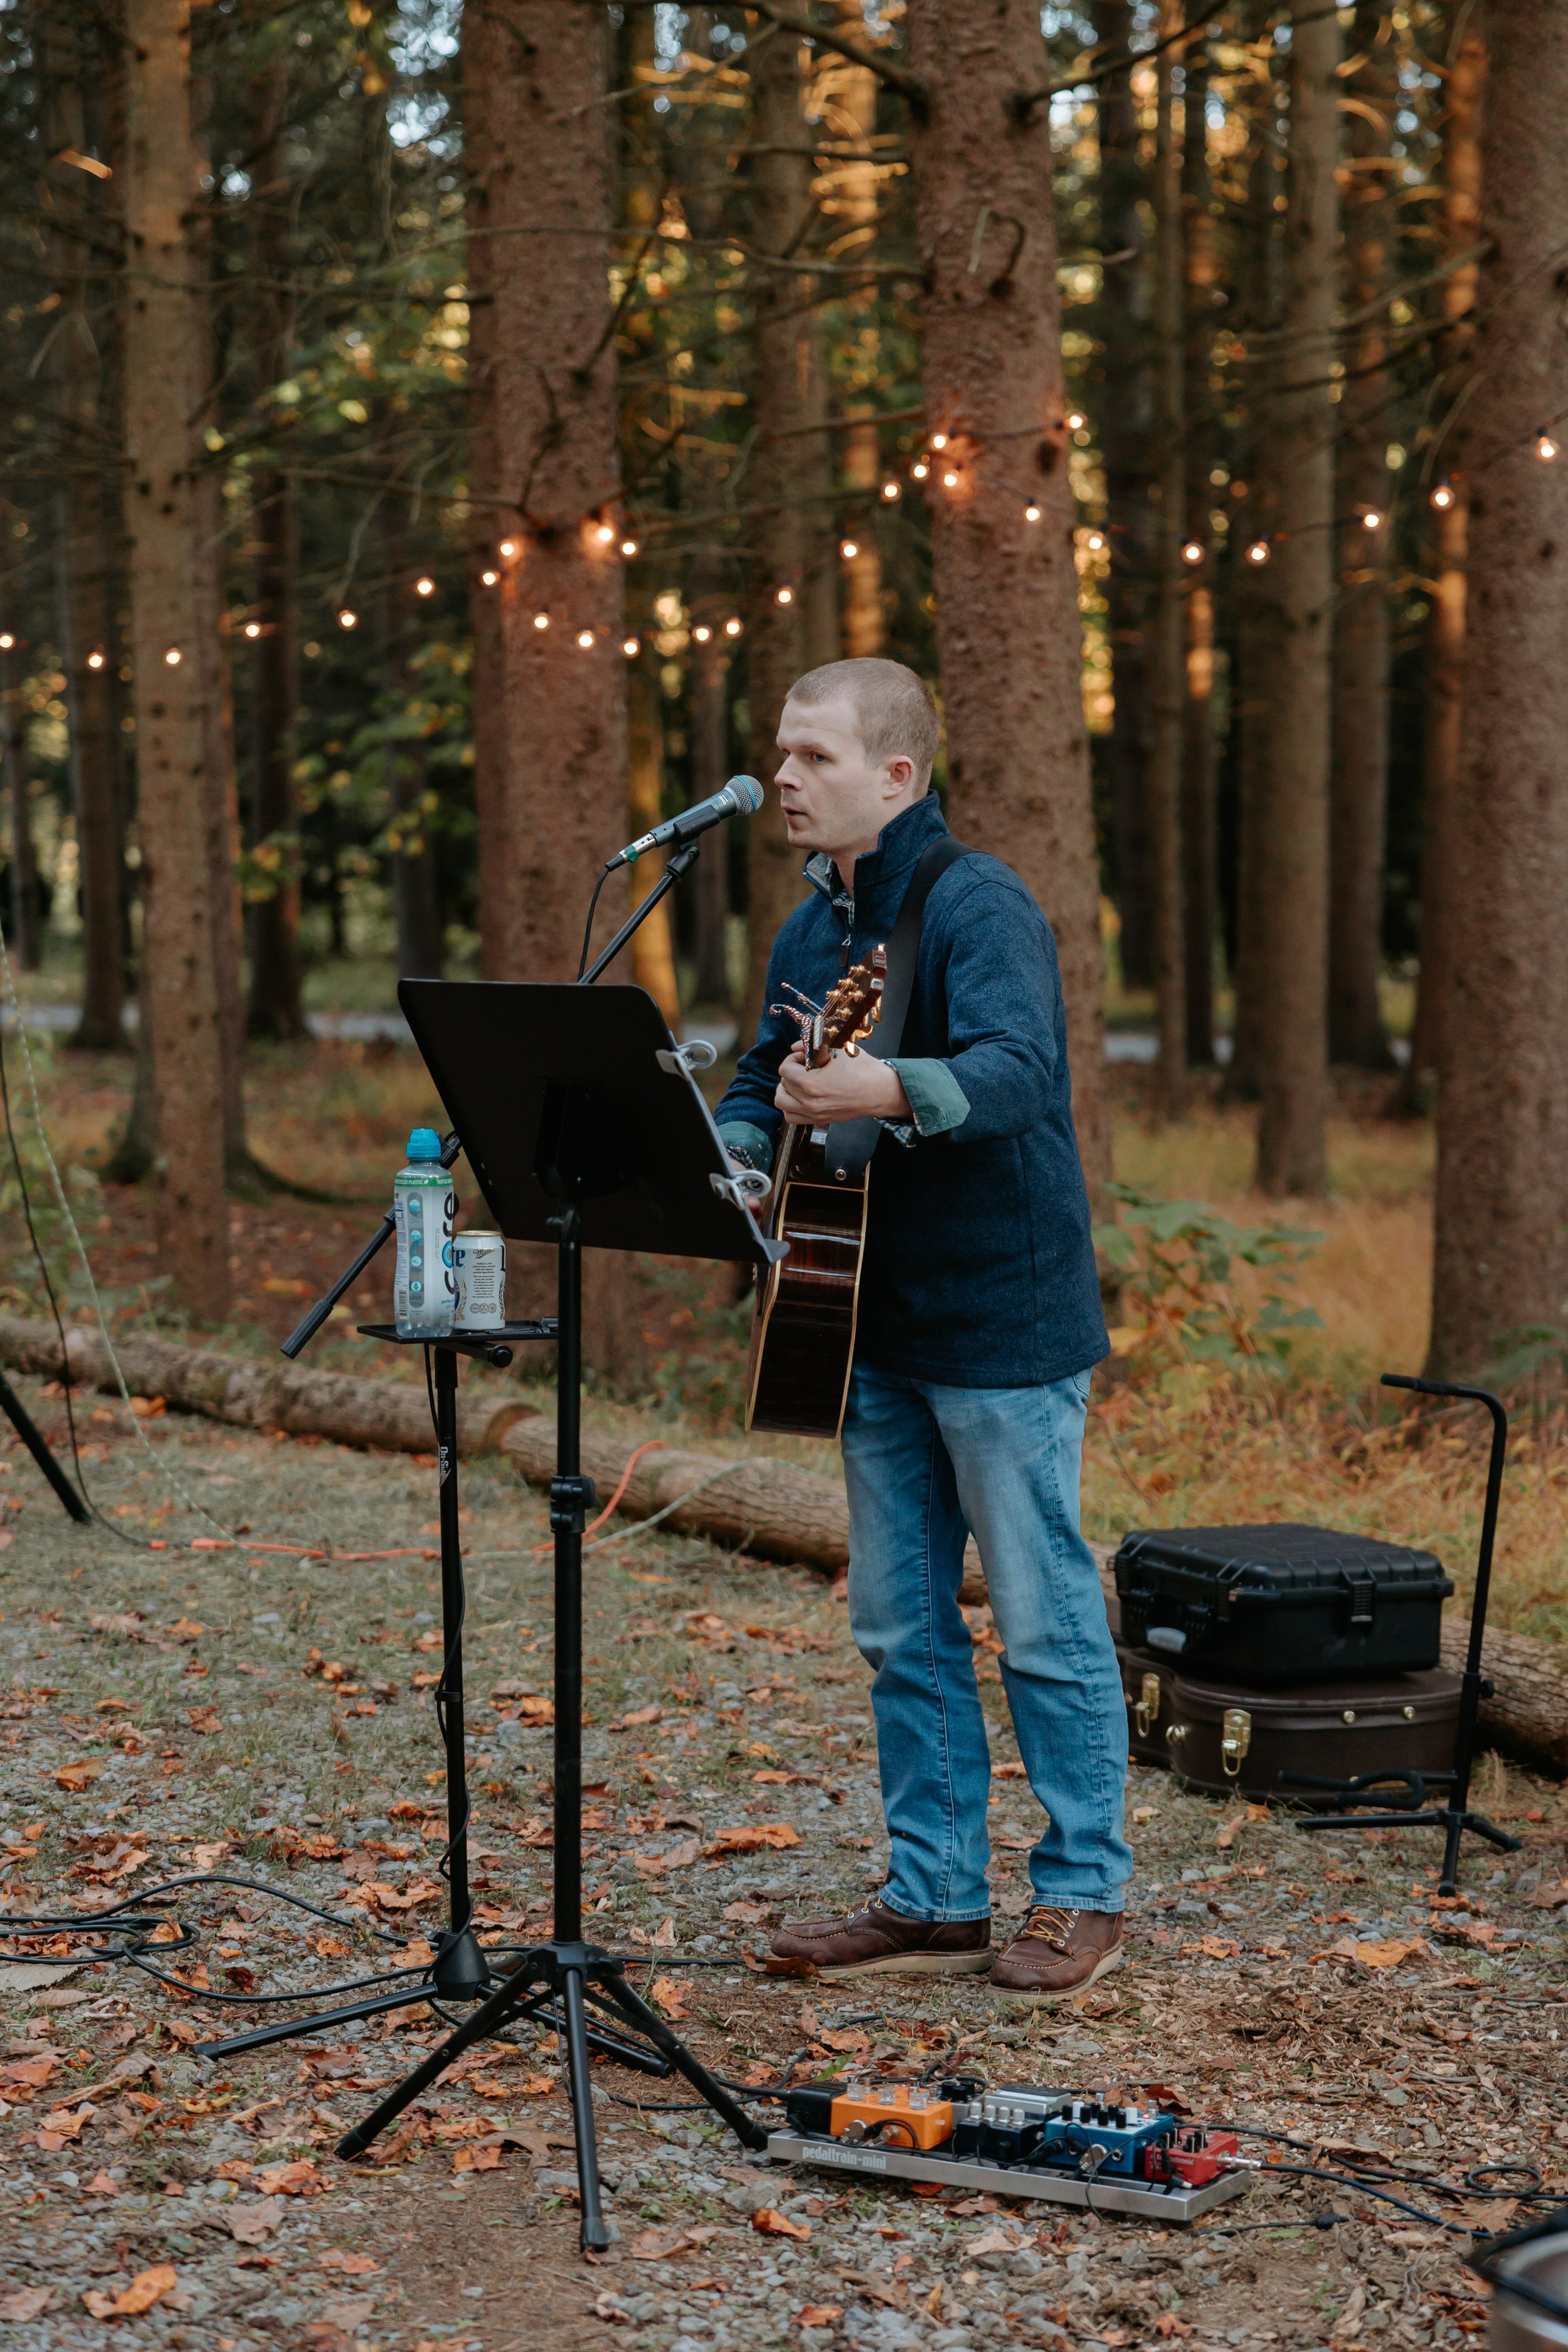 A man plays guitar in the woods.